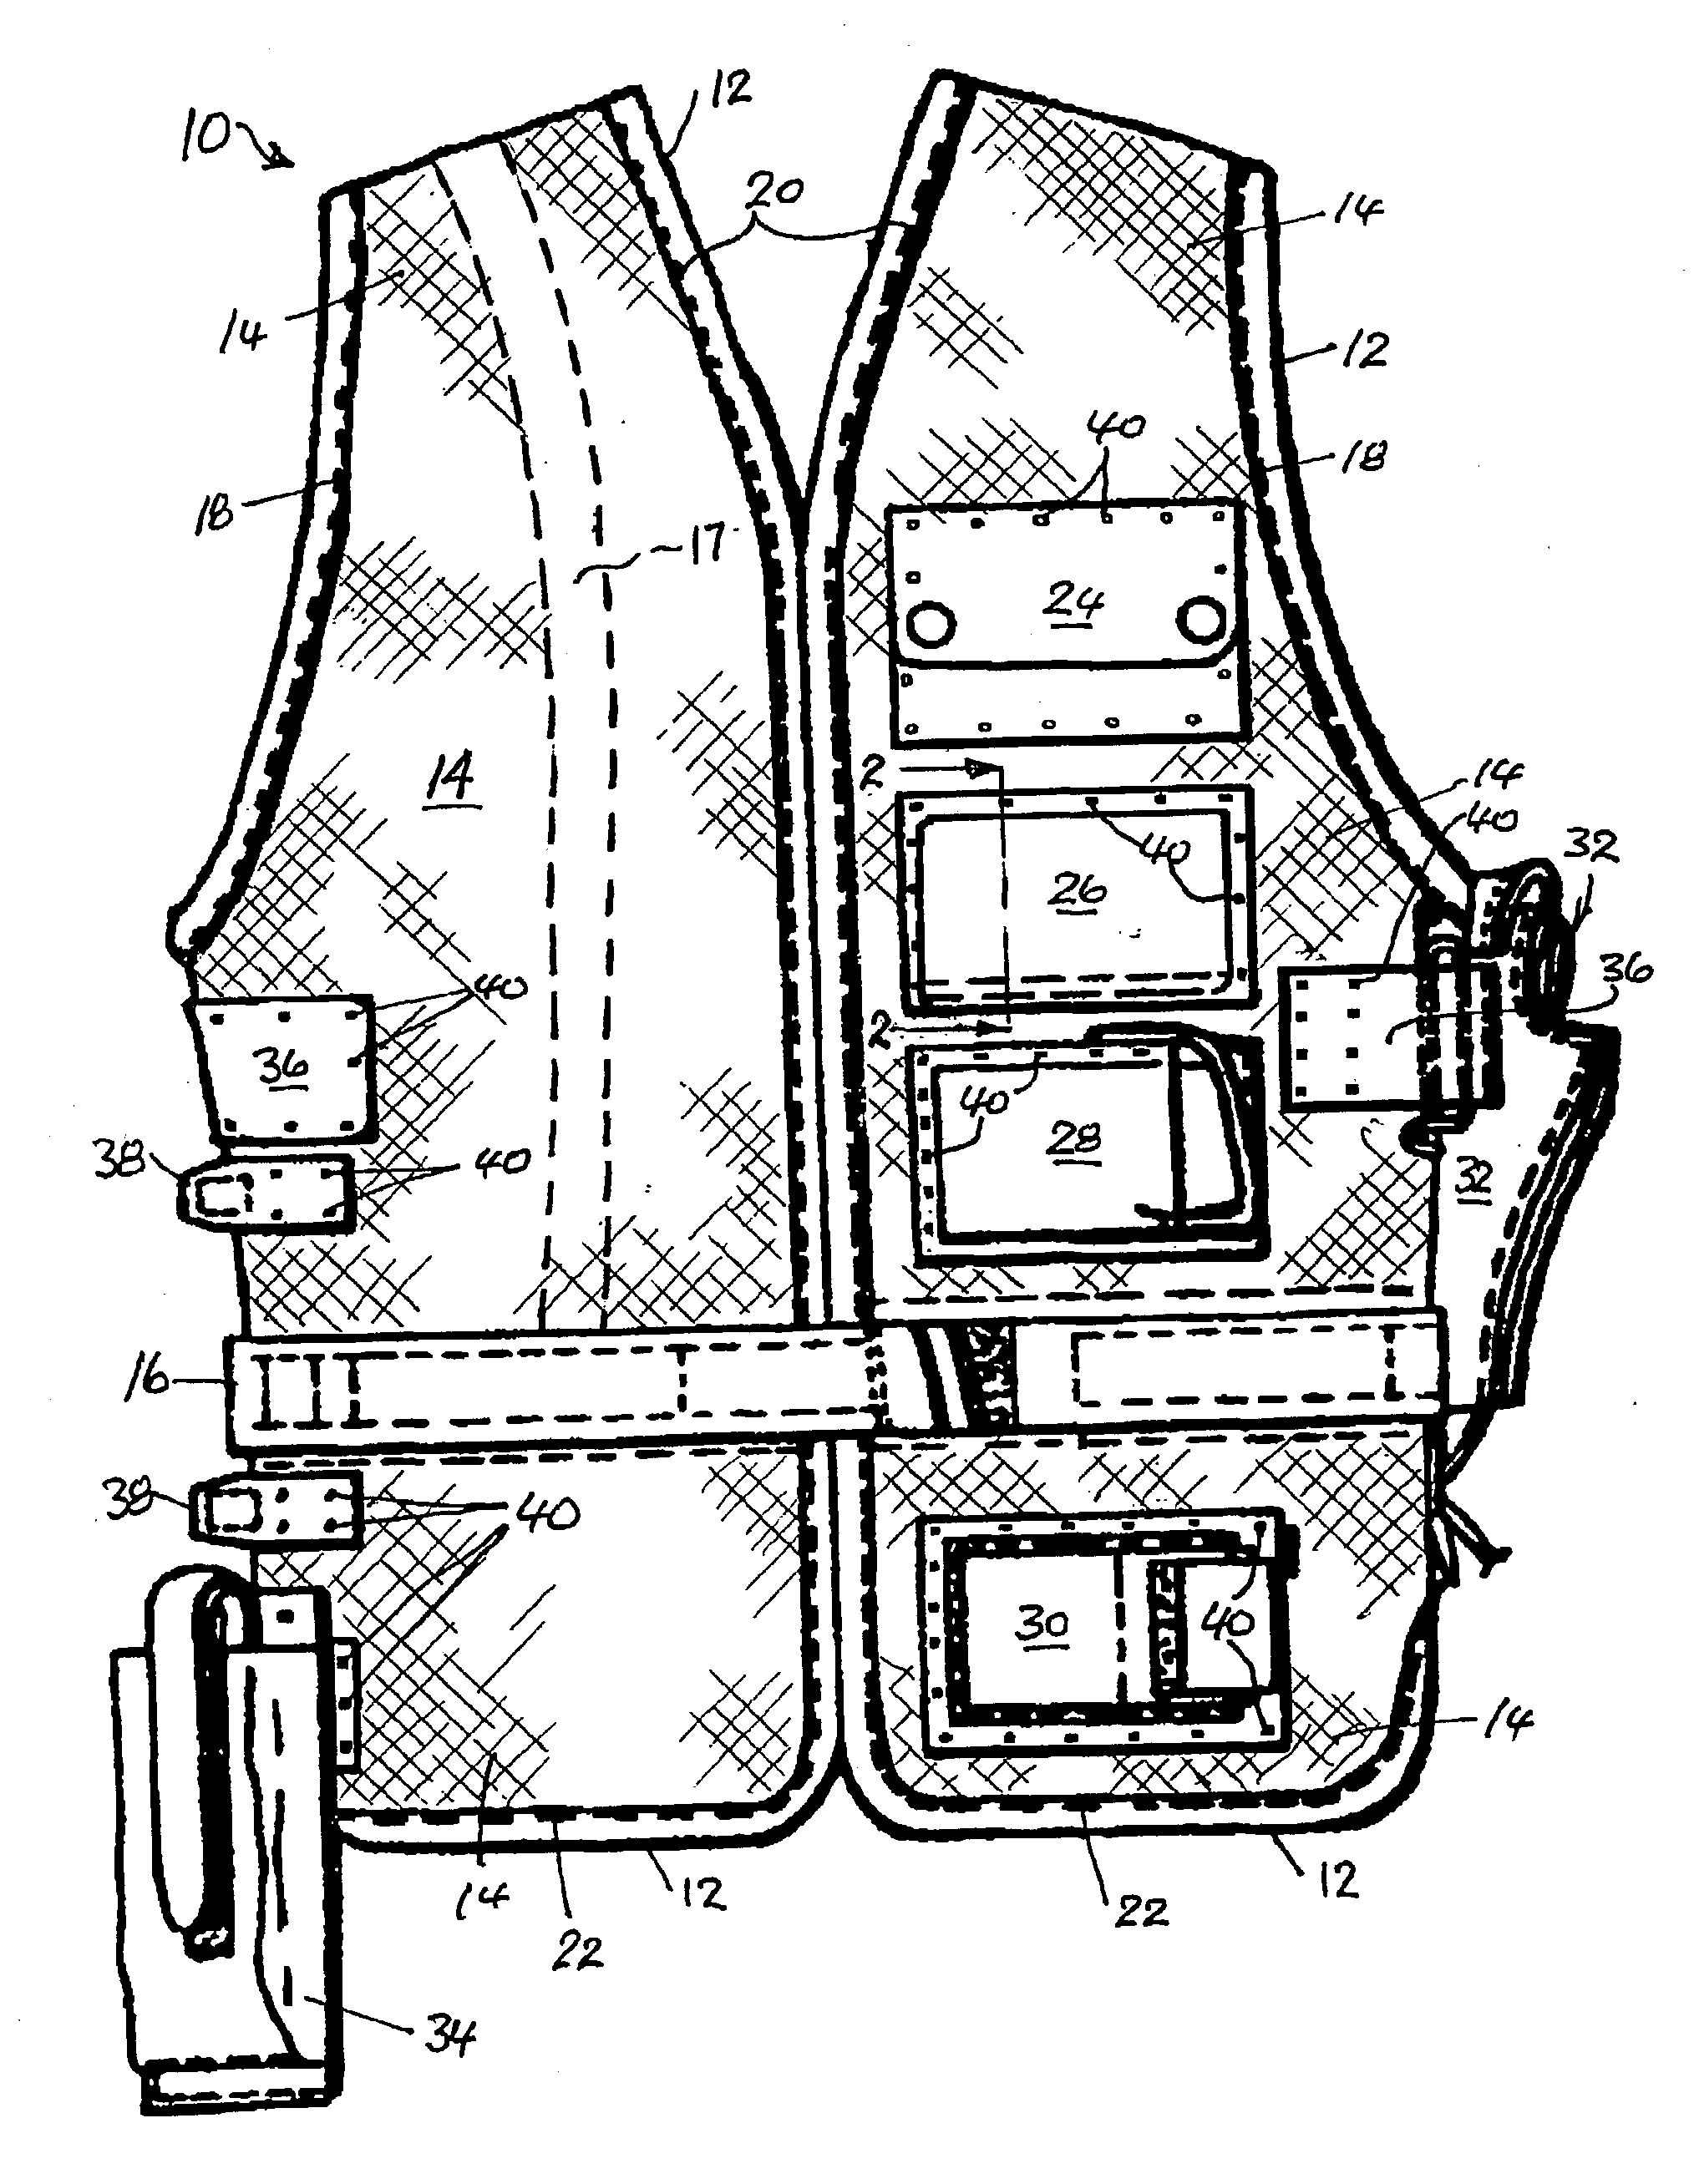 Load carrying assembly